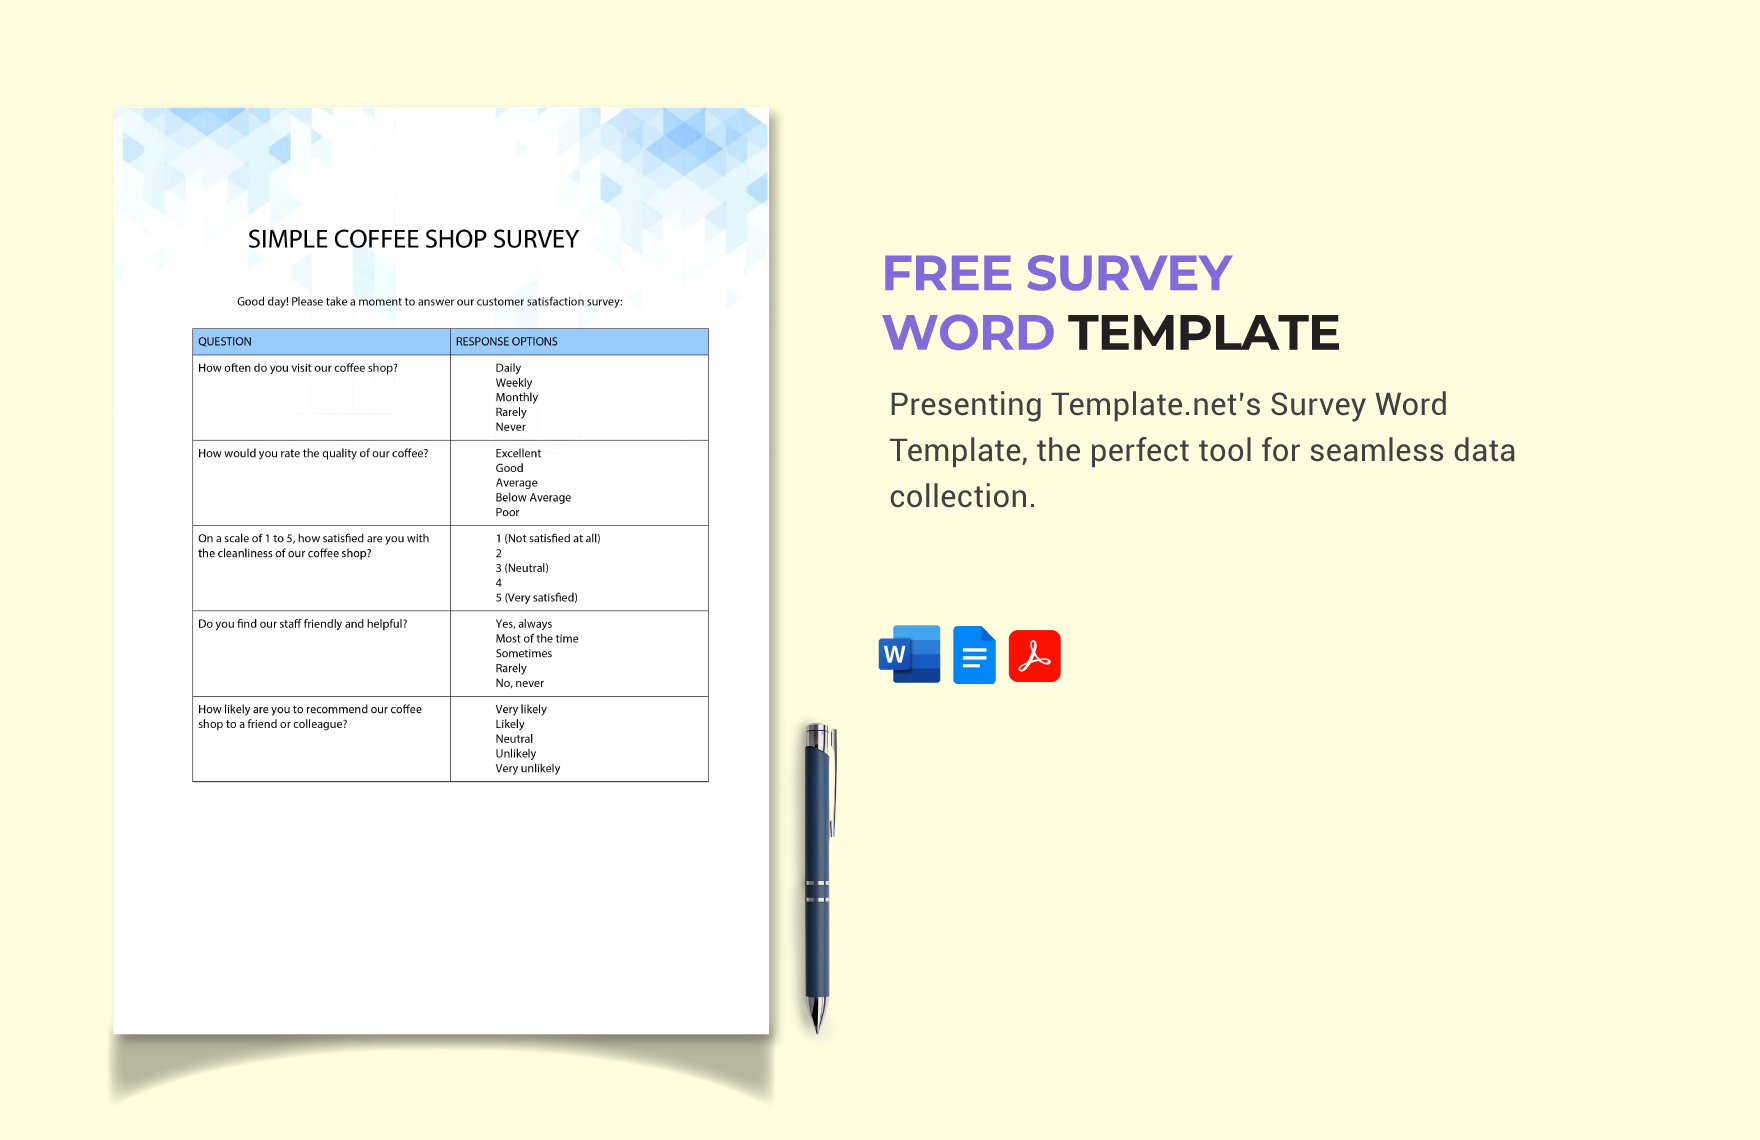 Free Survey Word Template